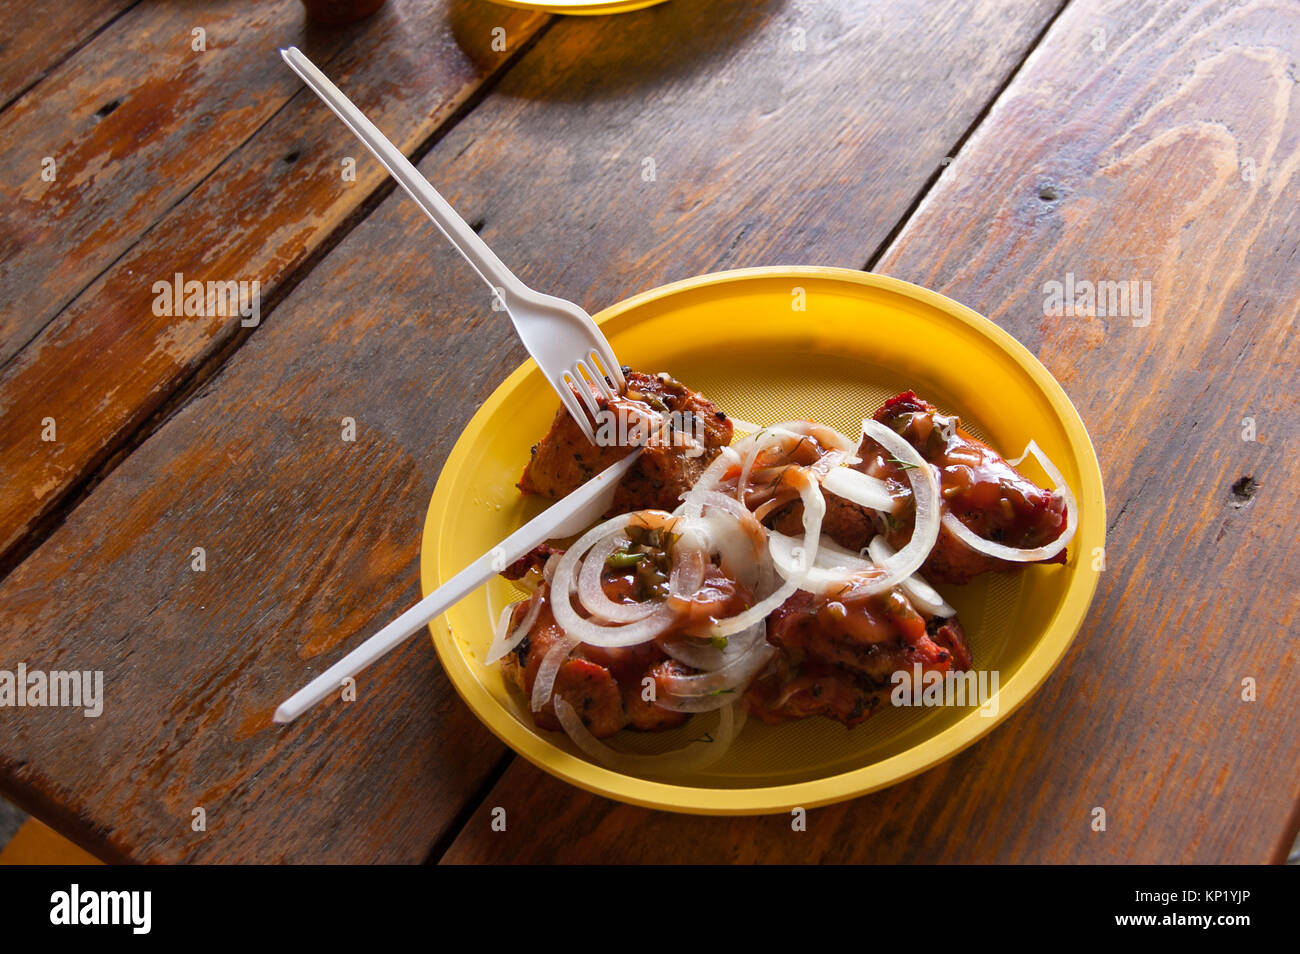 pieces of fried meat with pieces of onions on a yellow plastic plate Stock Photo